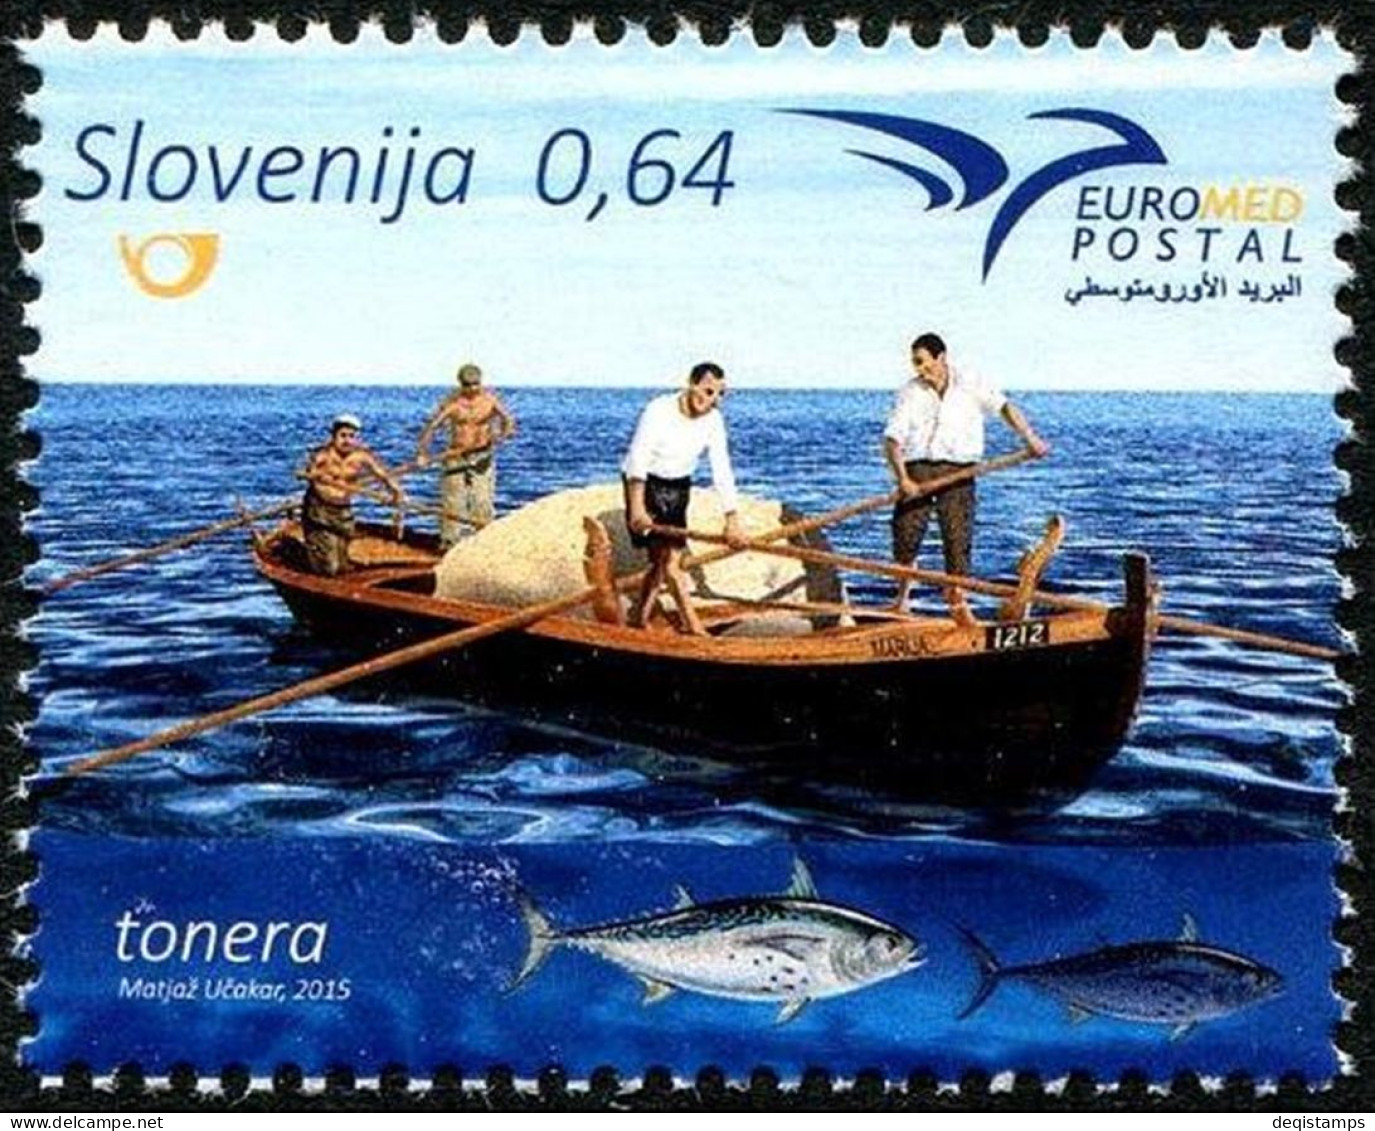 Slovenia Year 2015 Stamp - Fishing Boat EUROMED Issue - Slovenia